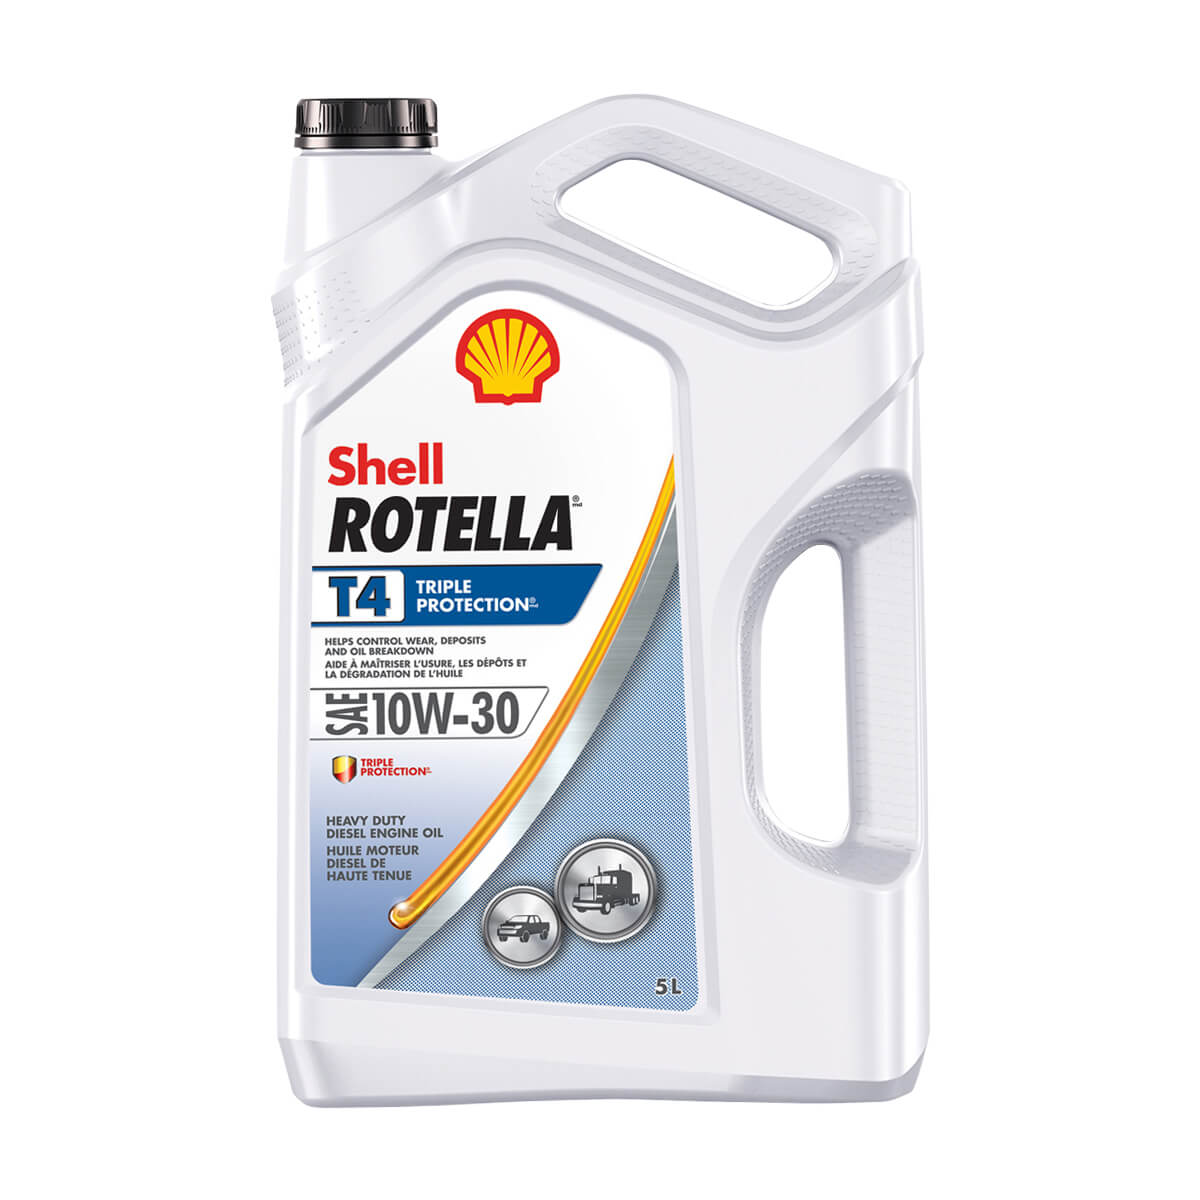 Shell Rotella T4 Triple Protection 10W-30 - 5 L